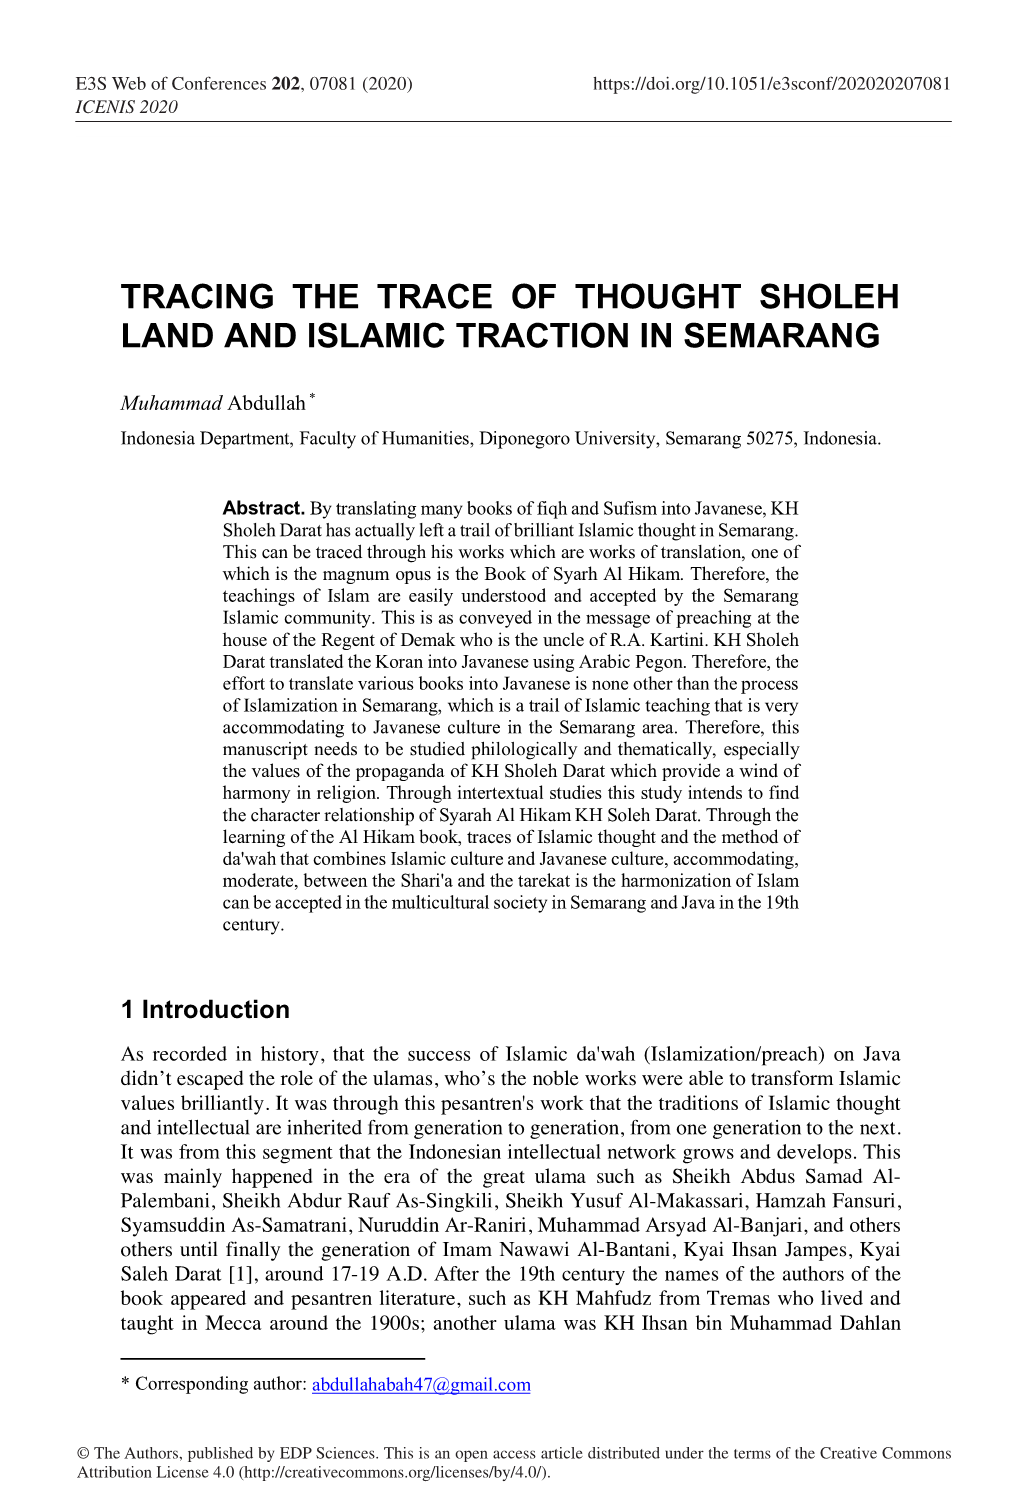 Tracing the Trace of Thought Sholeh Land and Islamic Traction in Semarang